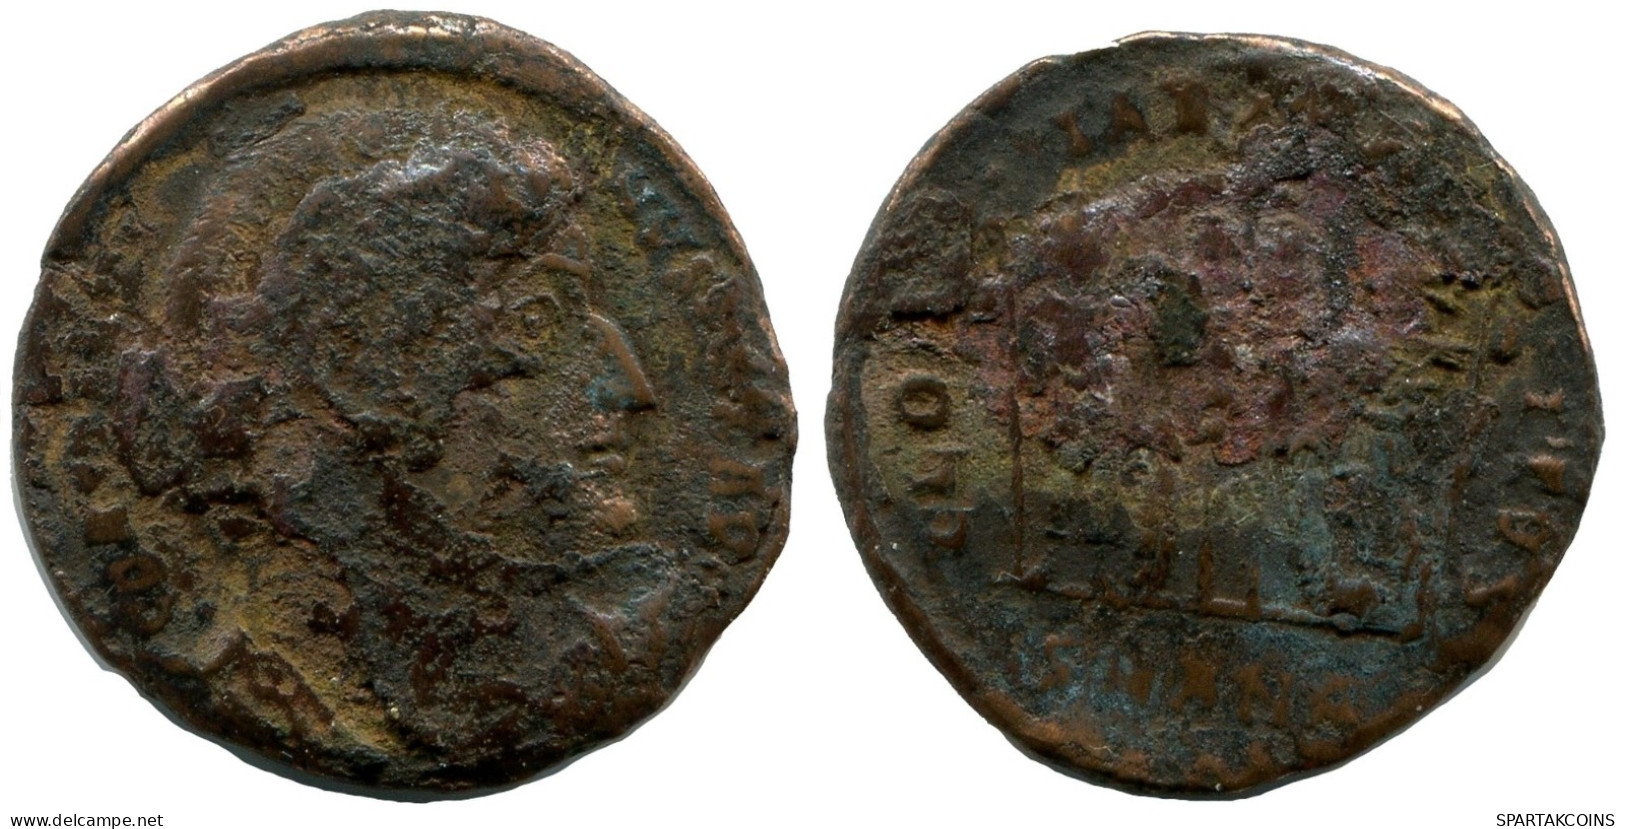 CONSTANTINE I MINTED IN ANTIOCH FROM THE ROYAL ONTARIO MUSEUM #ANC10592.14.F.A - El Impero Christiano (307 / 363)